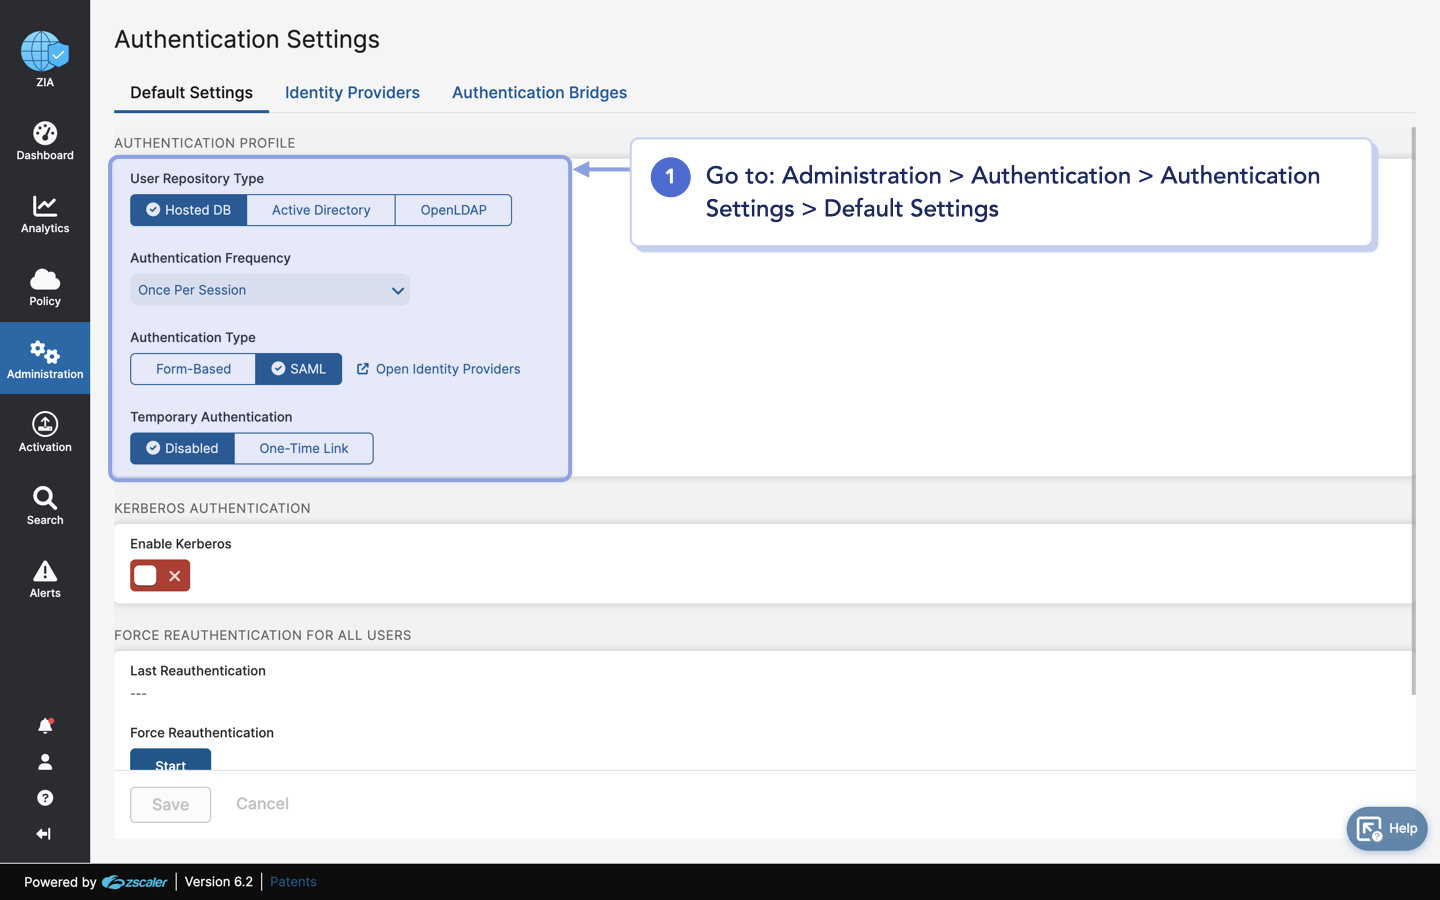 zscaler_authentication_settings_profile.png